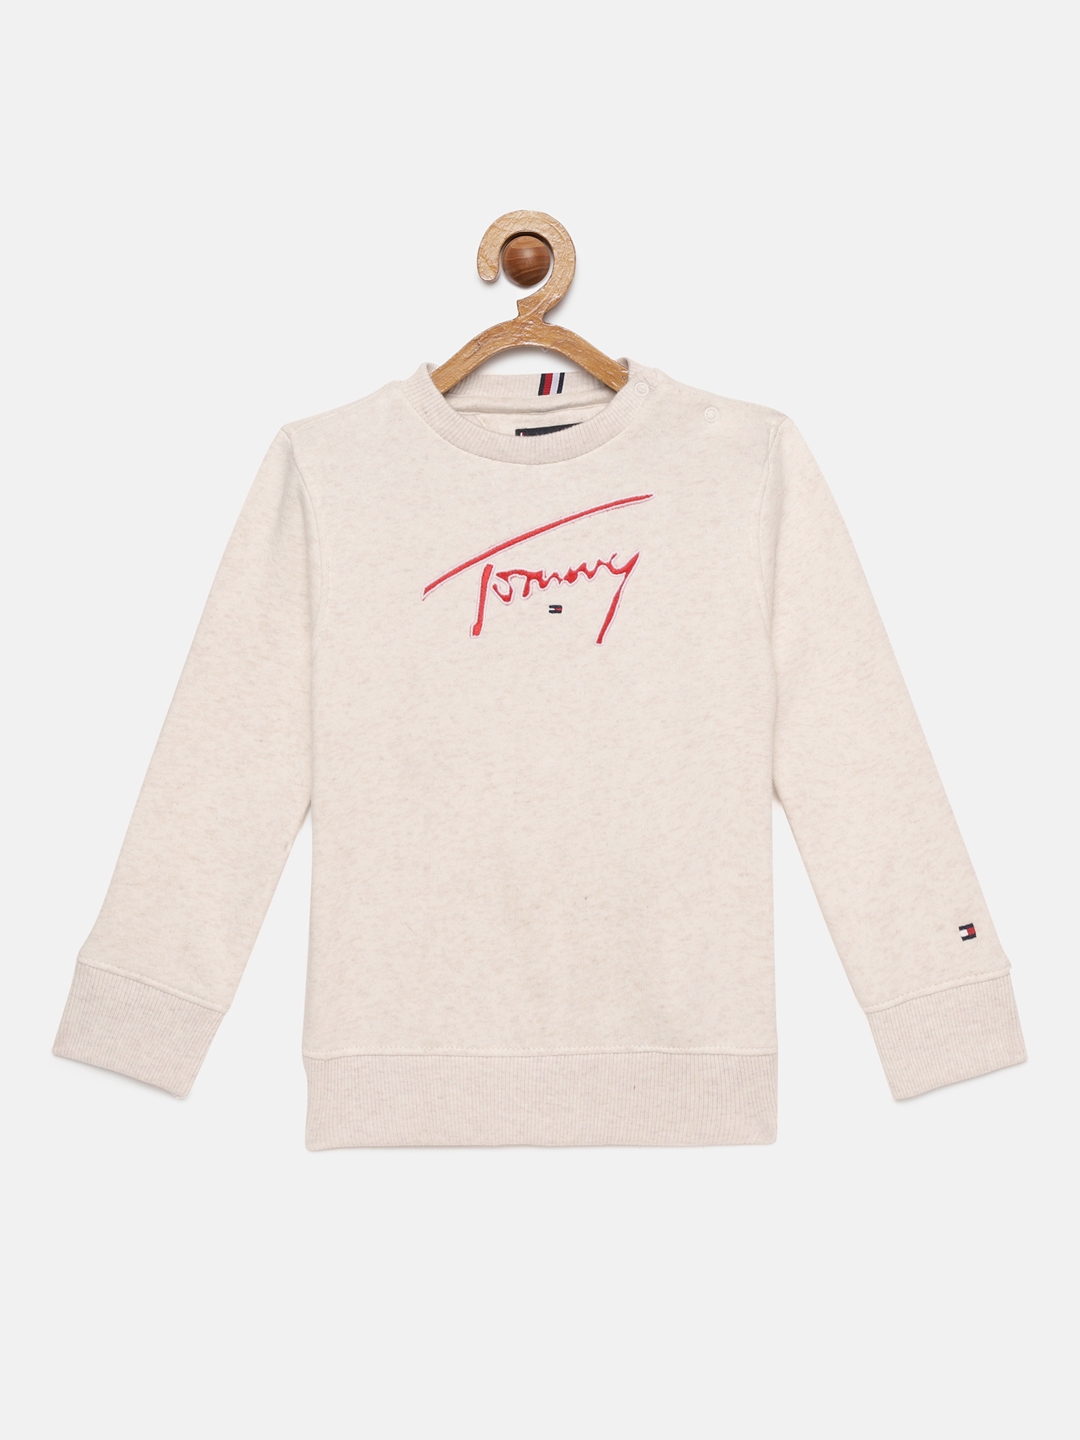 Buy Tommy Hilfiger Boys Brand Logo Embroidered Cream Coloured ...